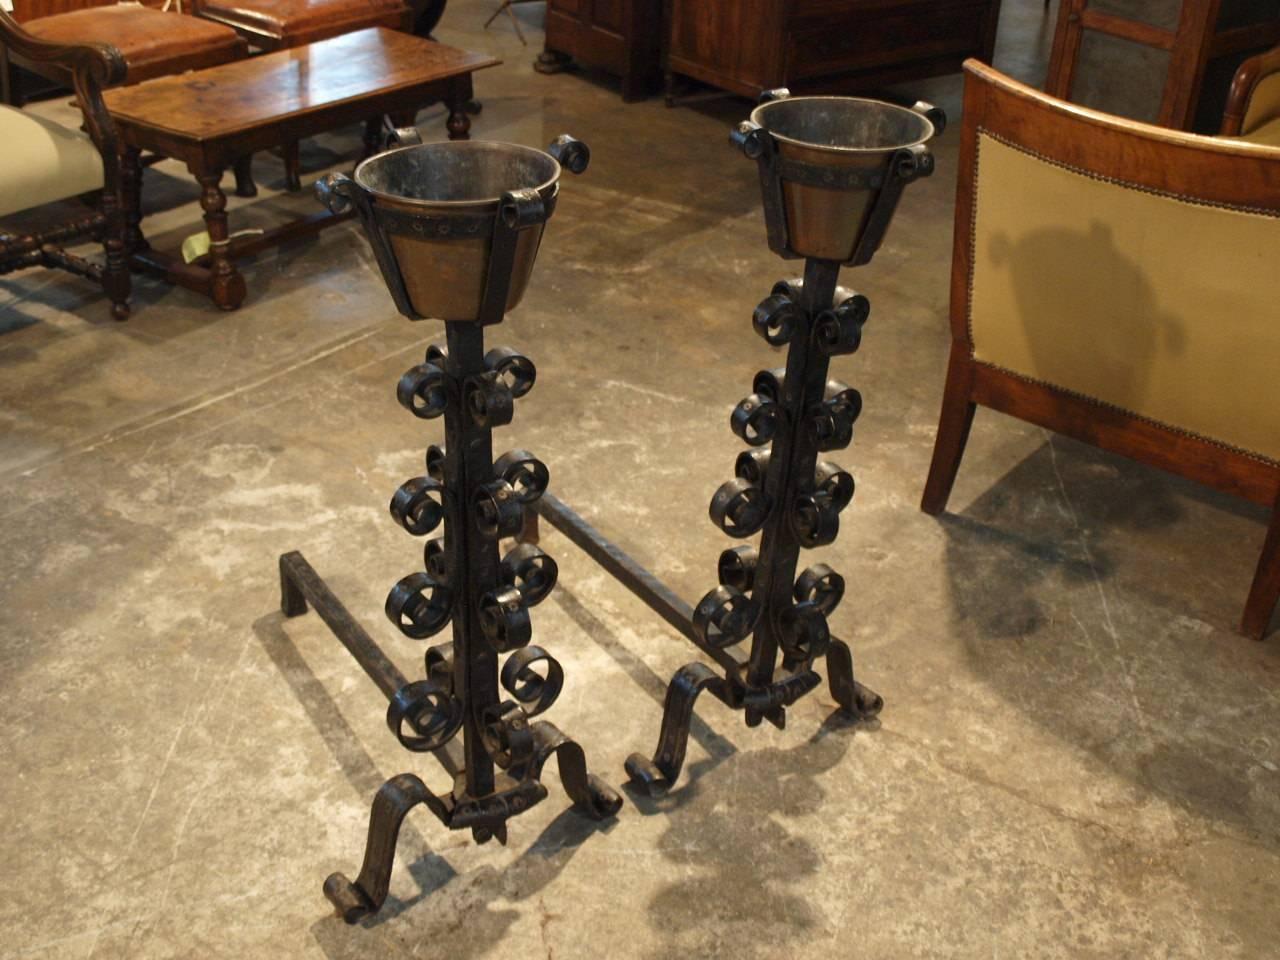 An outstanding pair of French late 18th century hand-forged andirons with their original copper vessels. Expertly forged and embossed with decorative ornamentation. Forged by a Compagnon member - a French organization of craftsmen and artisans